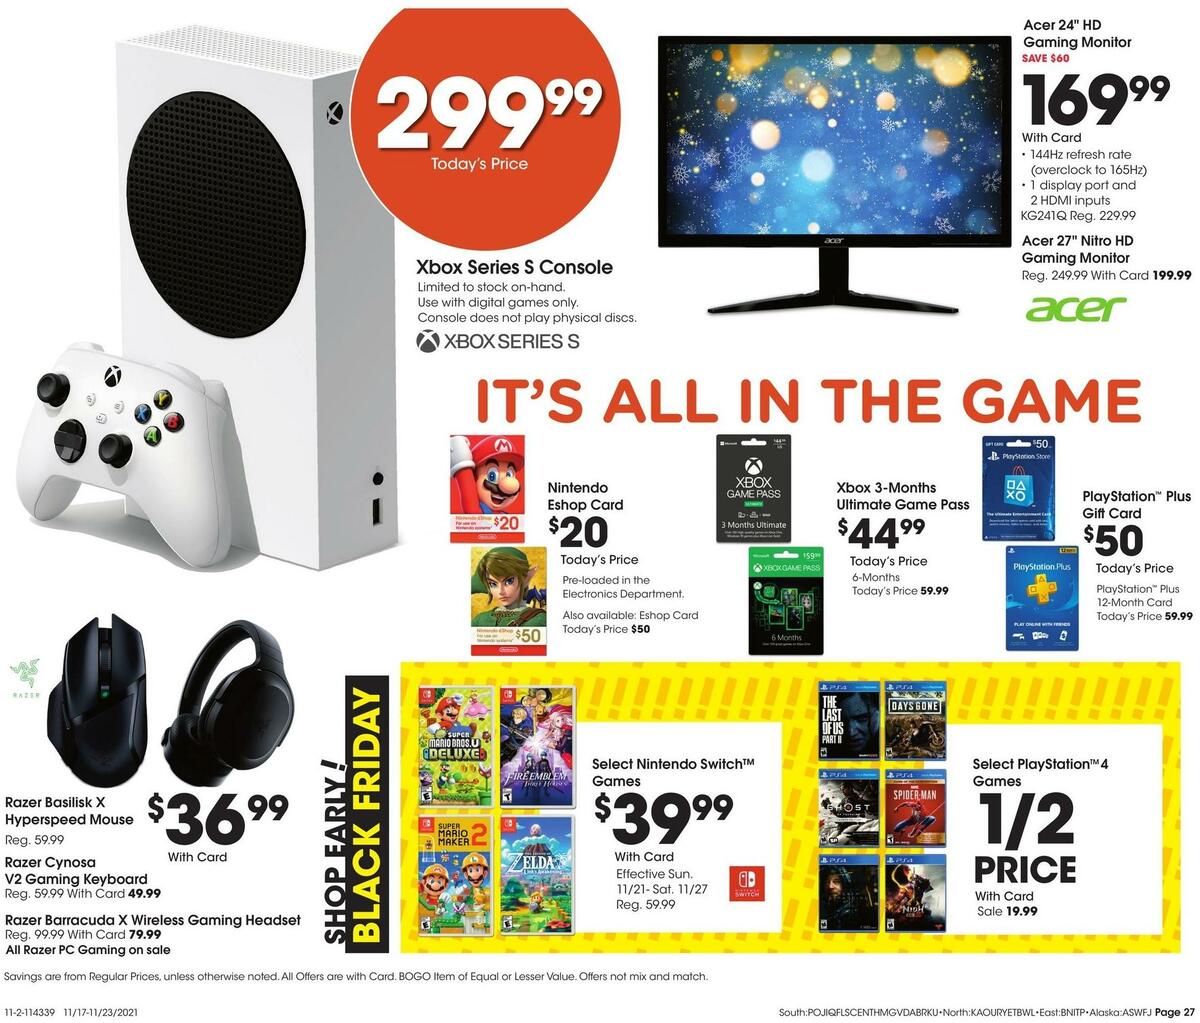 Fred Meyer General Merchandise Weekly Ad from November 17